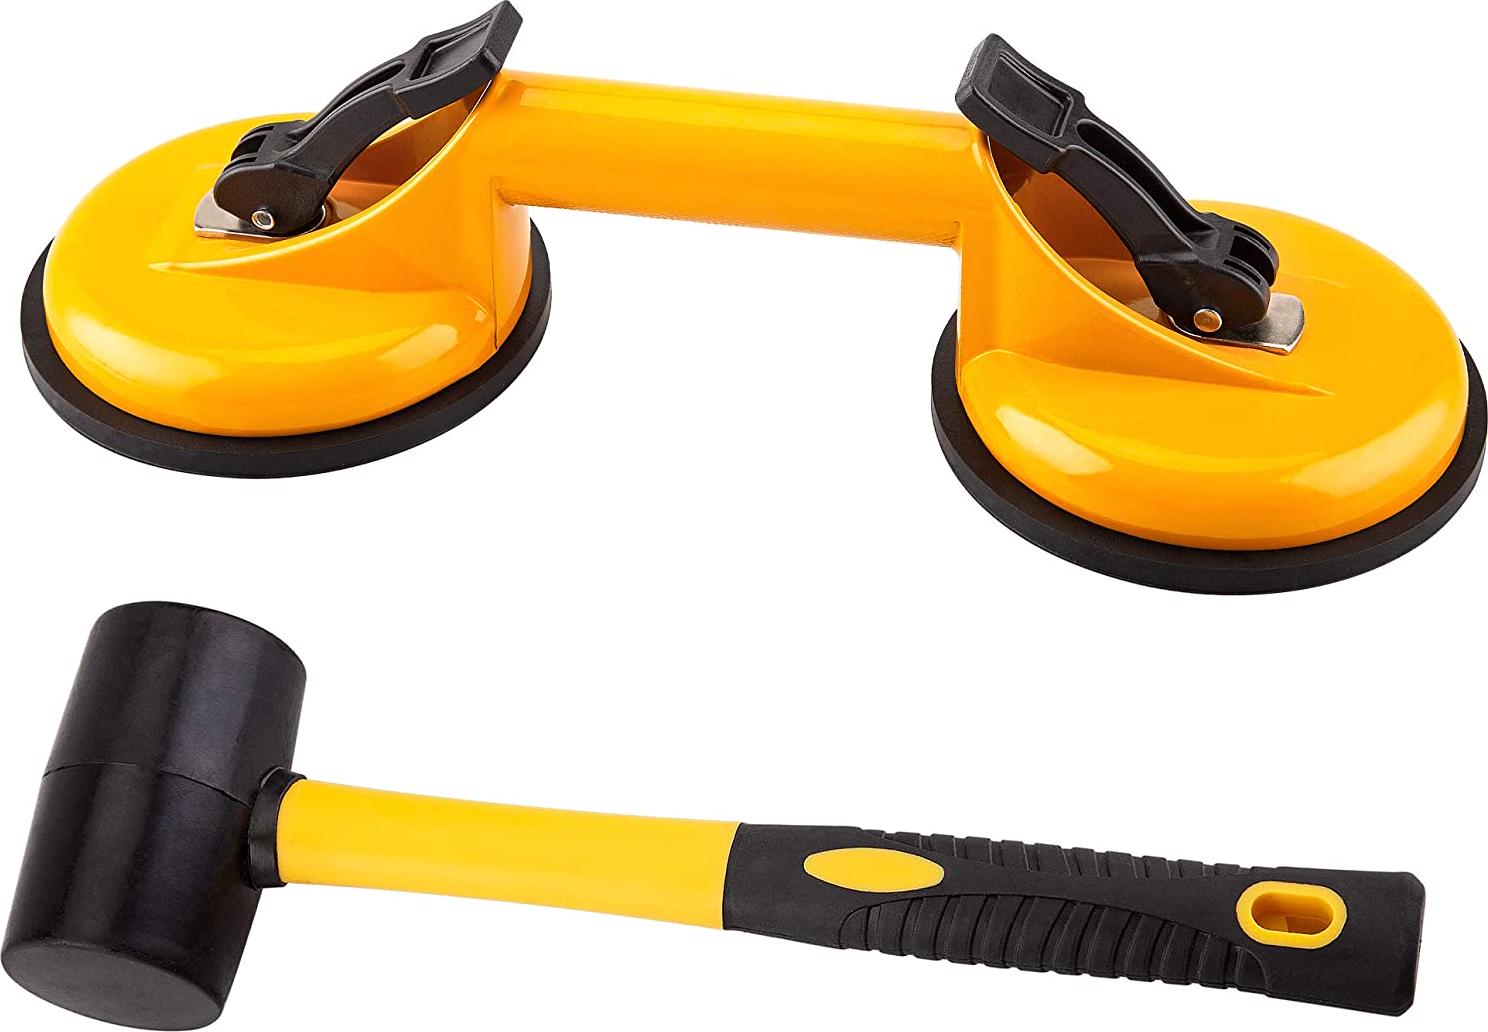 KUNTICA, Floor Gap Fixer Tool for Laminate Floor Gap Repair Include Premium Quality Heavy Duty Aluminum Suction Cup and Fiberglass Handle Rubber Mallet (Yellow) - Can't Use on Scraped Surface Floor